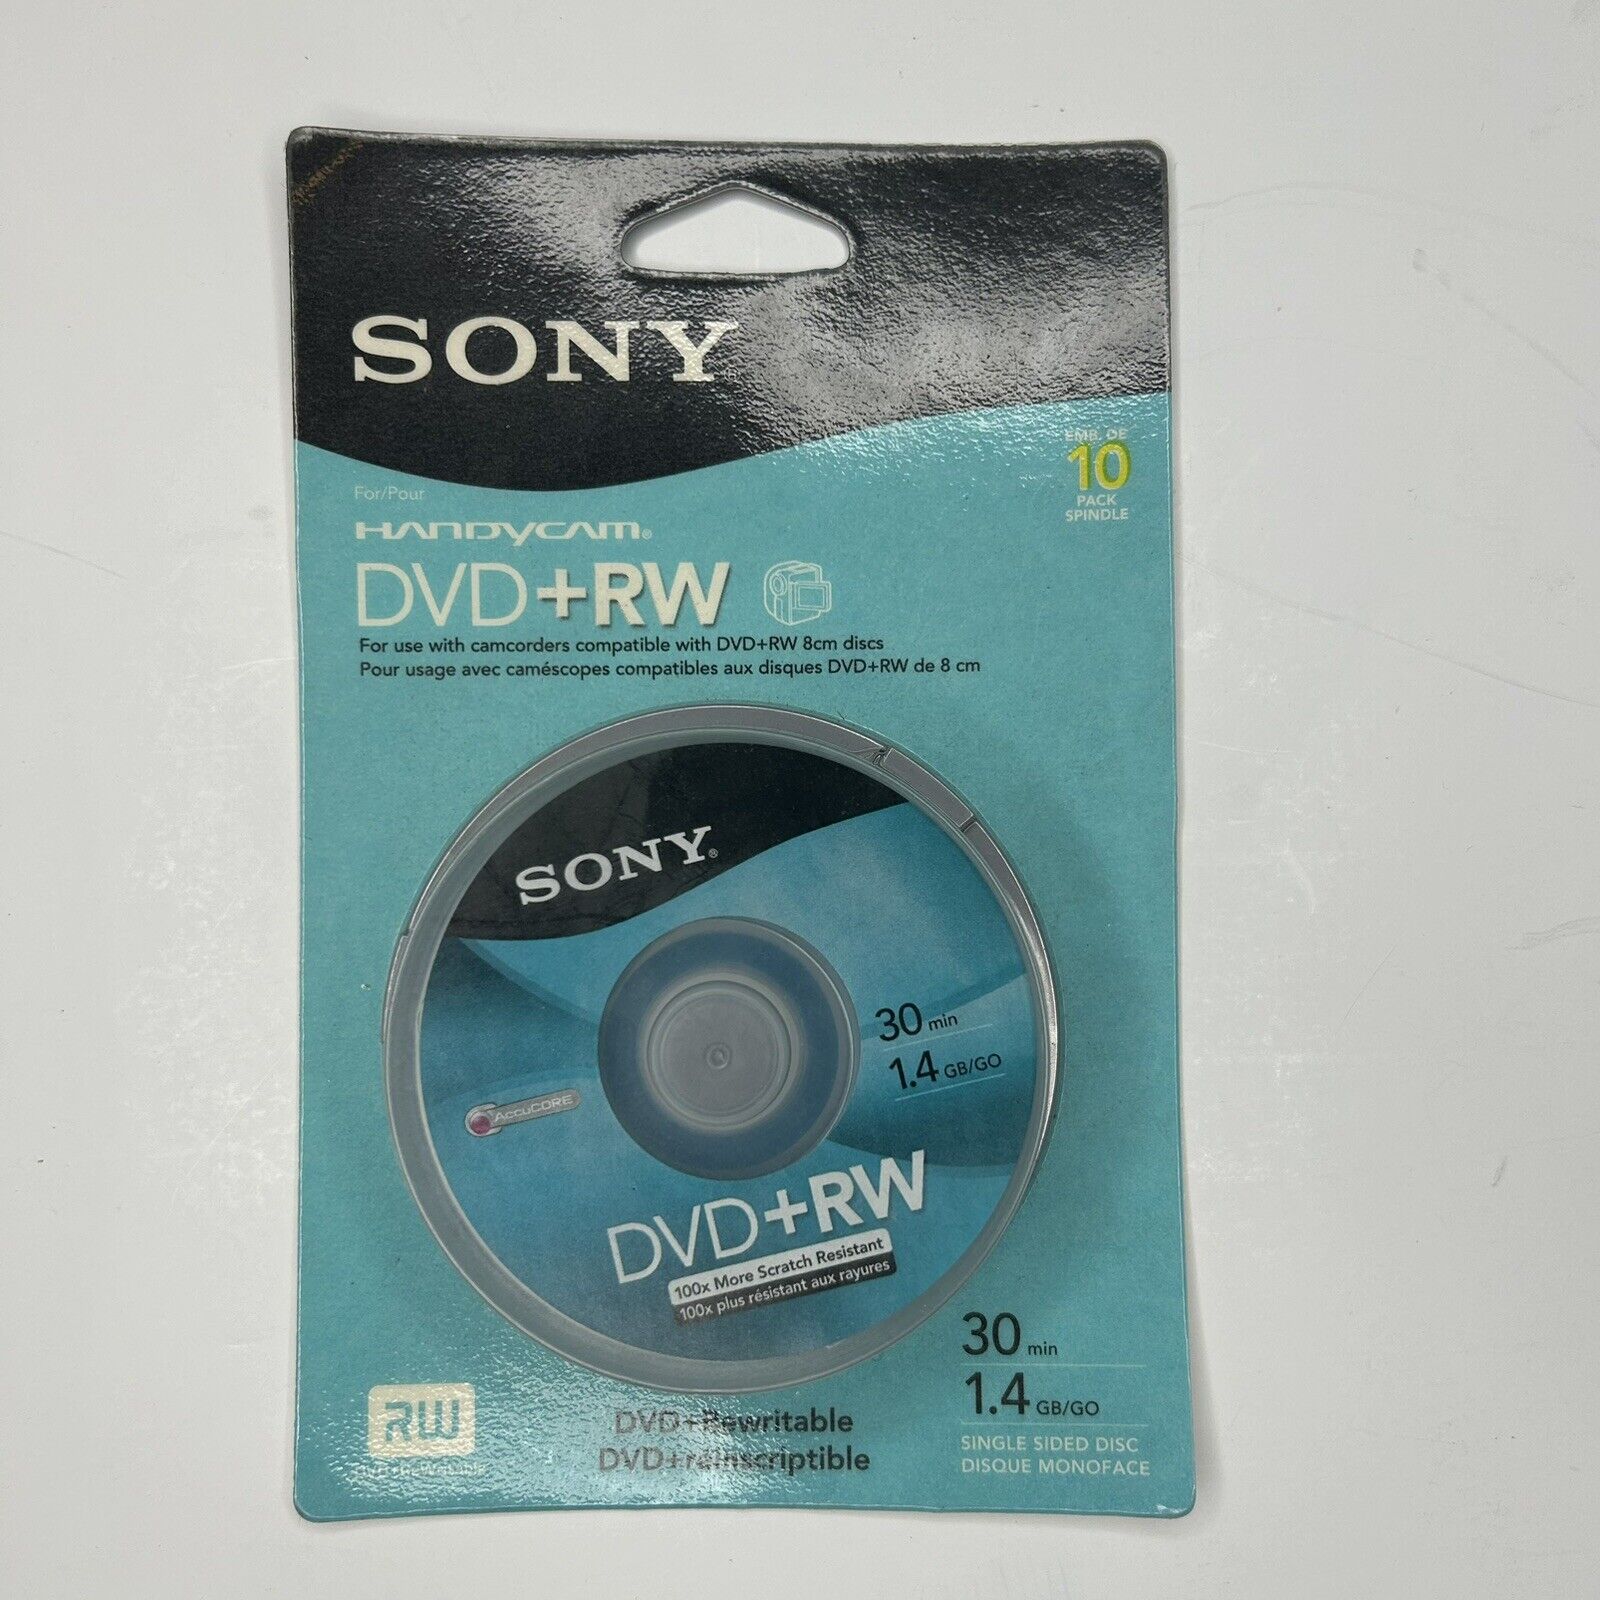 Sony 8 CM DVD Plus RW Spindle Skin Pack 10 Pack 30 min 1.4GB Brand New Sealed